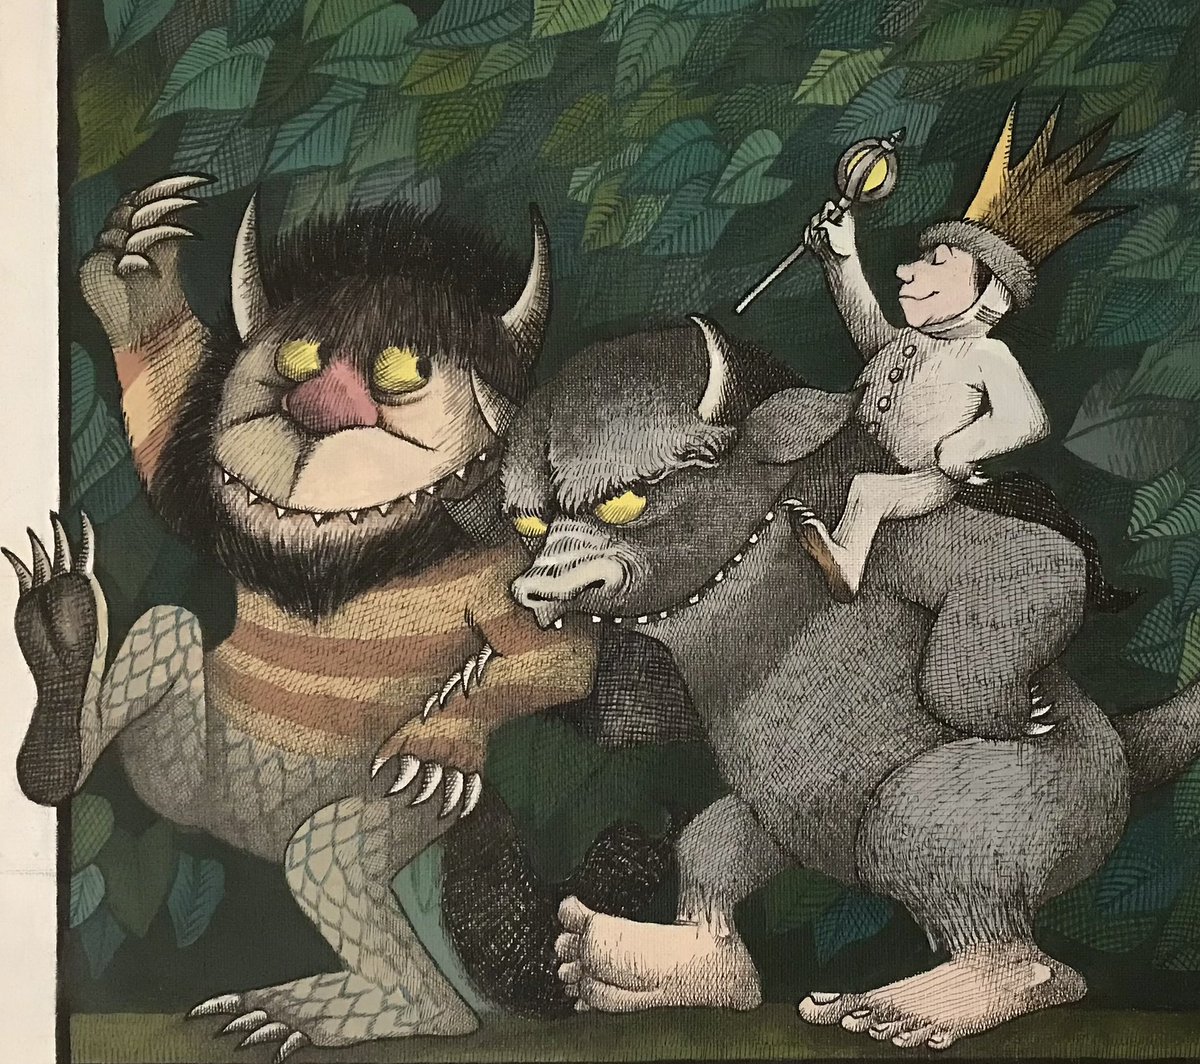 A painting I made of WHERE THE WILD THINGS ARE by Maurice Sendak a few years back. My favourite book, it also inspired my crosshatching technique. Every time I look at this book I’m transported to another place & I remember back to when I found it in the library when I was a kid.